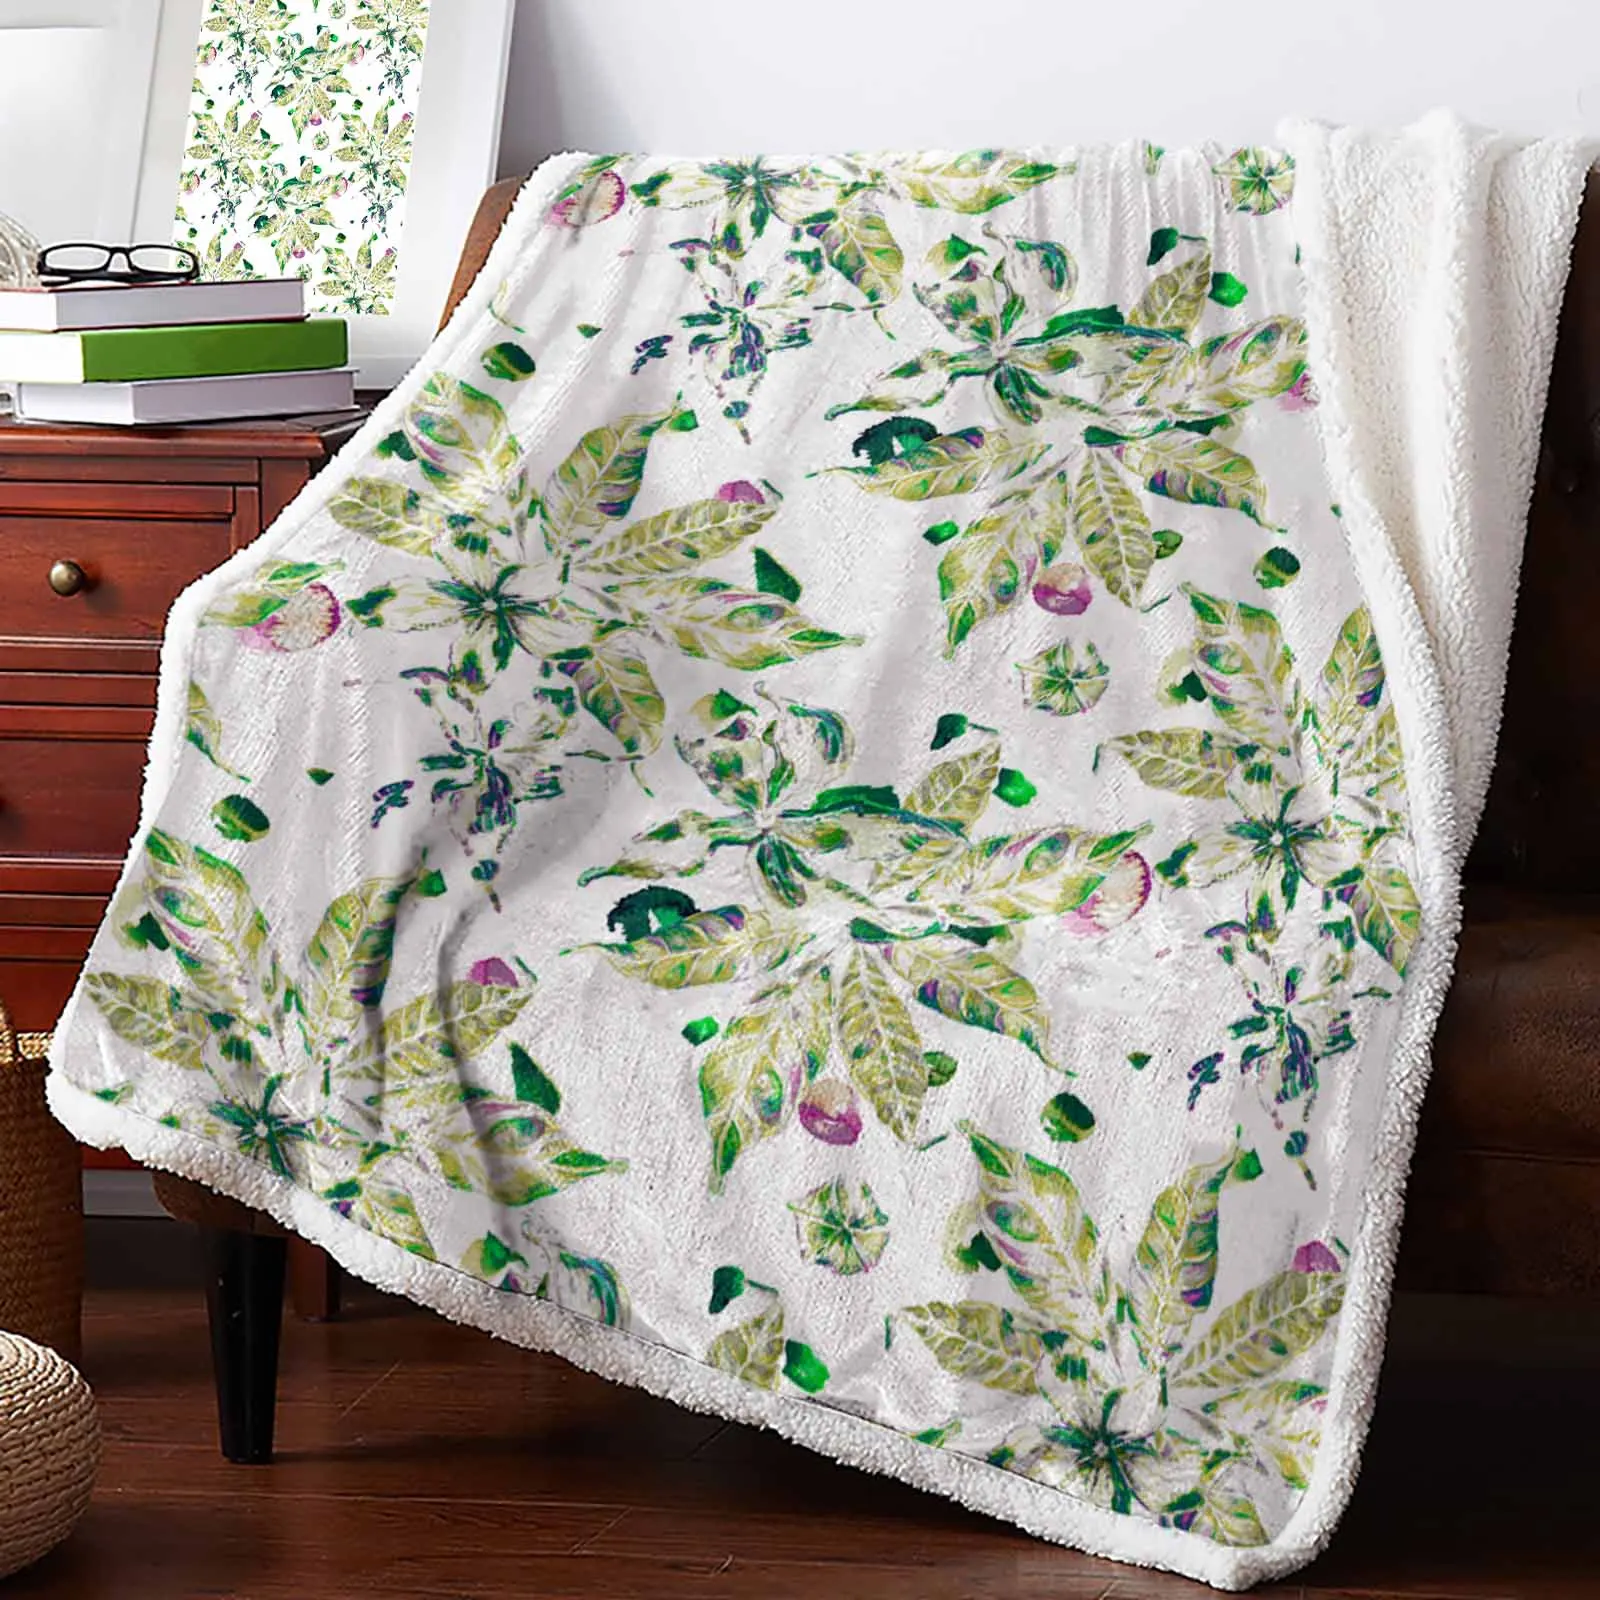 

Hand Drawn Leaves Plants Cashmere Blanket Warm Winter Soft Throw Blankets for Beds Sofa Wool Blanket Bedspread